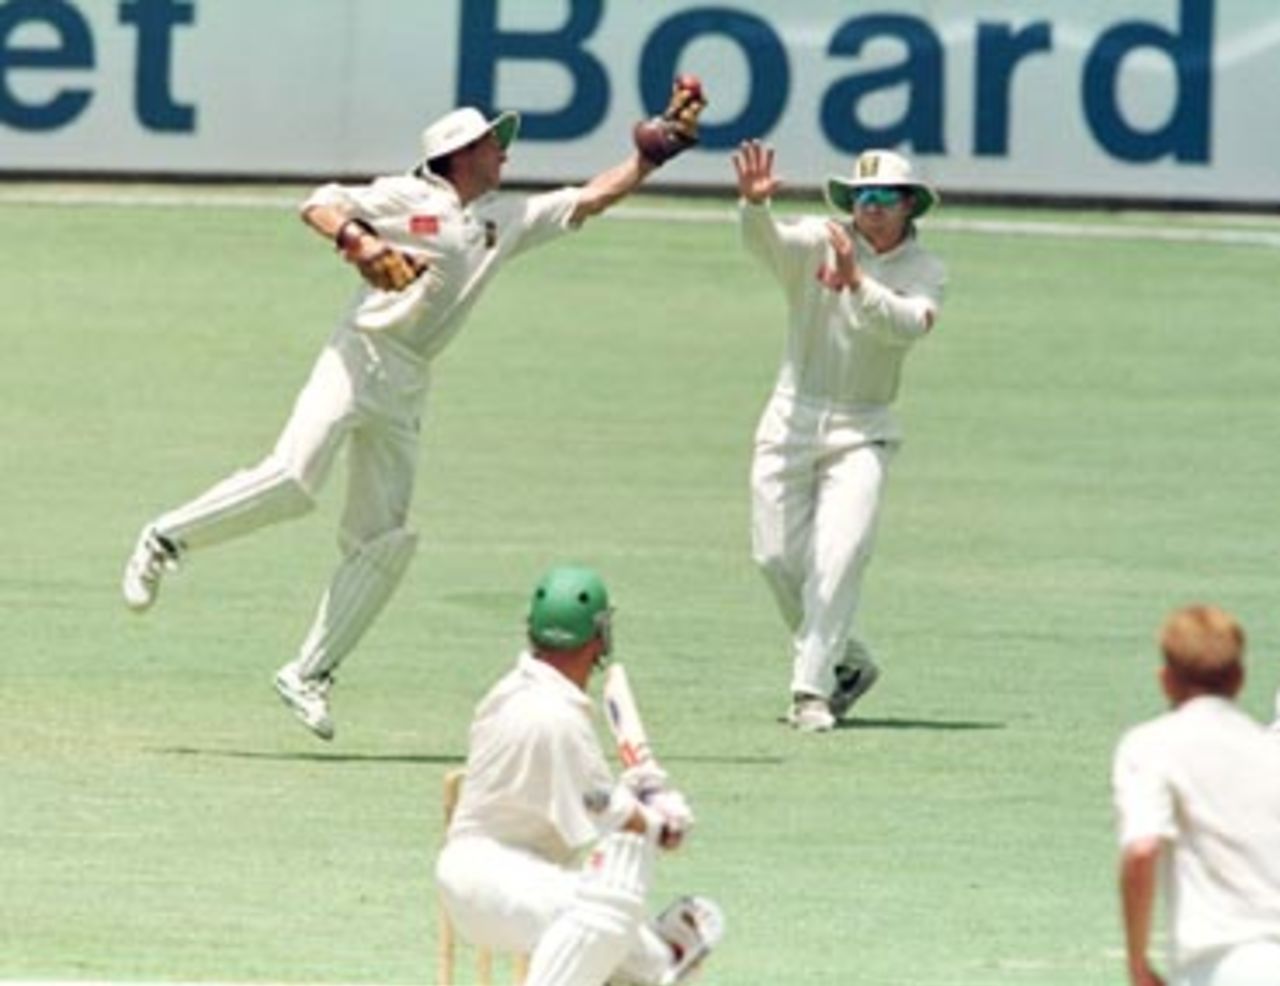 Dave Richardson reaches after a Sean Pollock highball during the 3rd day of the Australia 'A' v South Africans 4 day match at the Gabba in Brisbane. December 21st 1997.